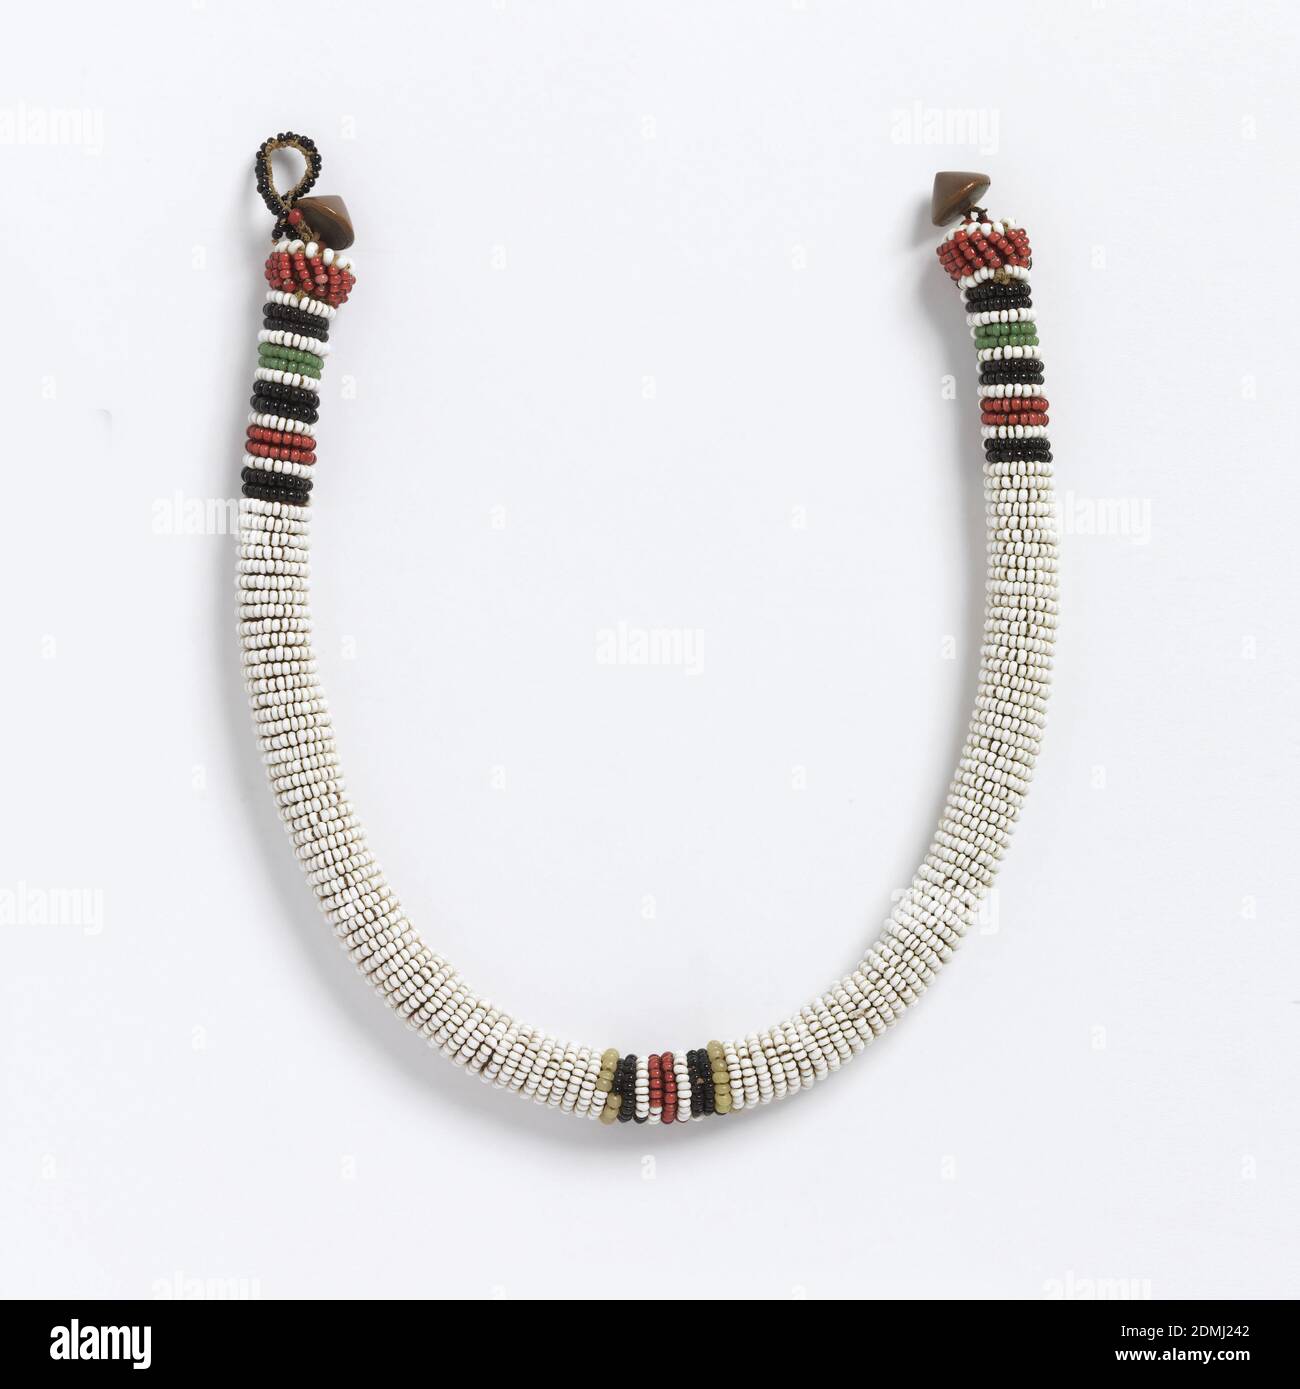 Necklace, Medium: glass beads, metal fasteners, Tubular necklace with horizontal rows of white glass beads, with red, green and black stripes at the center front and back. Cone-shaped metal fastener., South Africa, late 19th–early 20th century, jewelry, Necklace Stock Photo